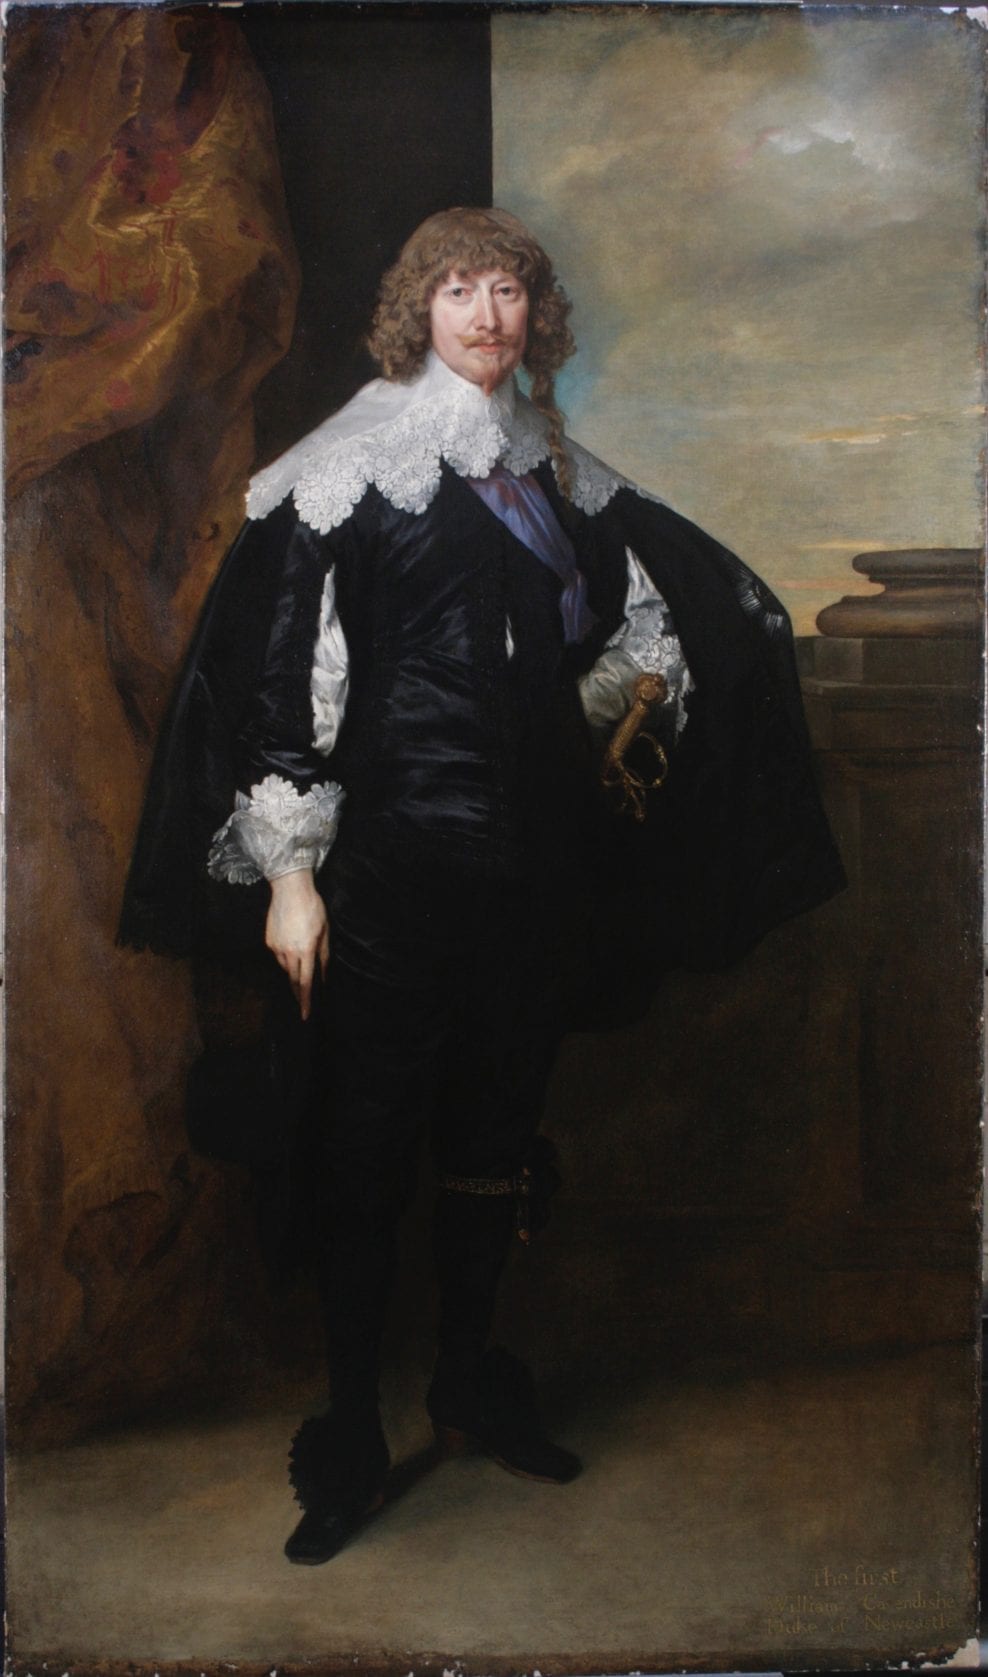 The Conservation of William Cavendish, 1st Duke of Newcastle, by Sir Anthony Van Dyck